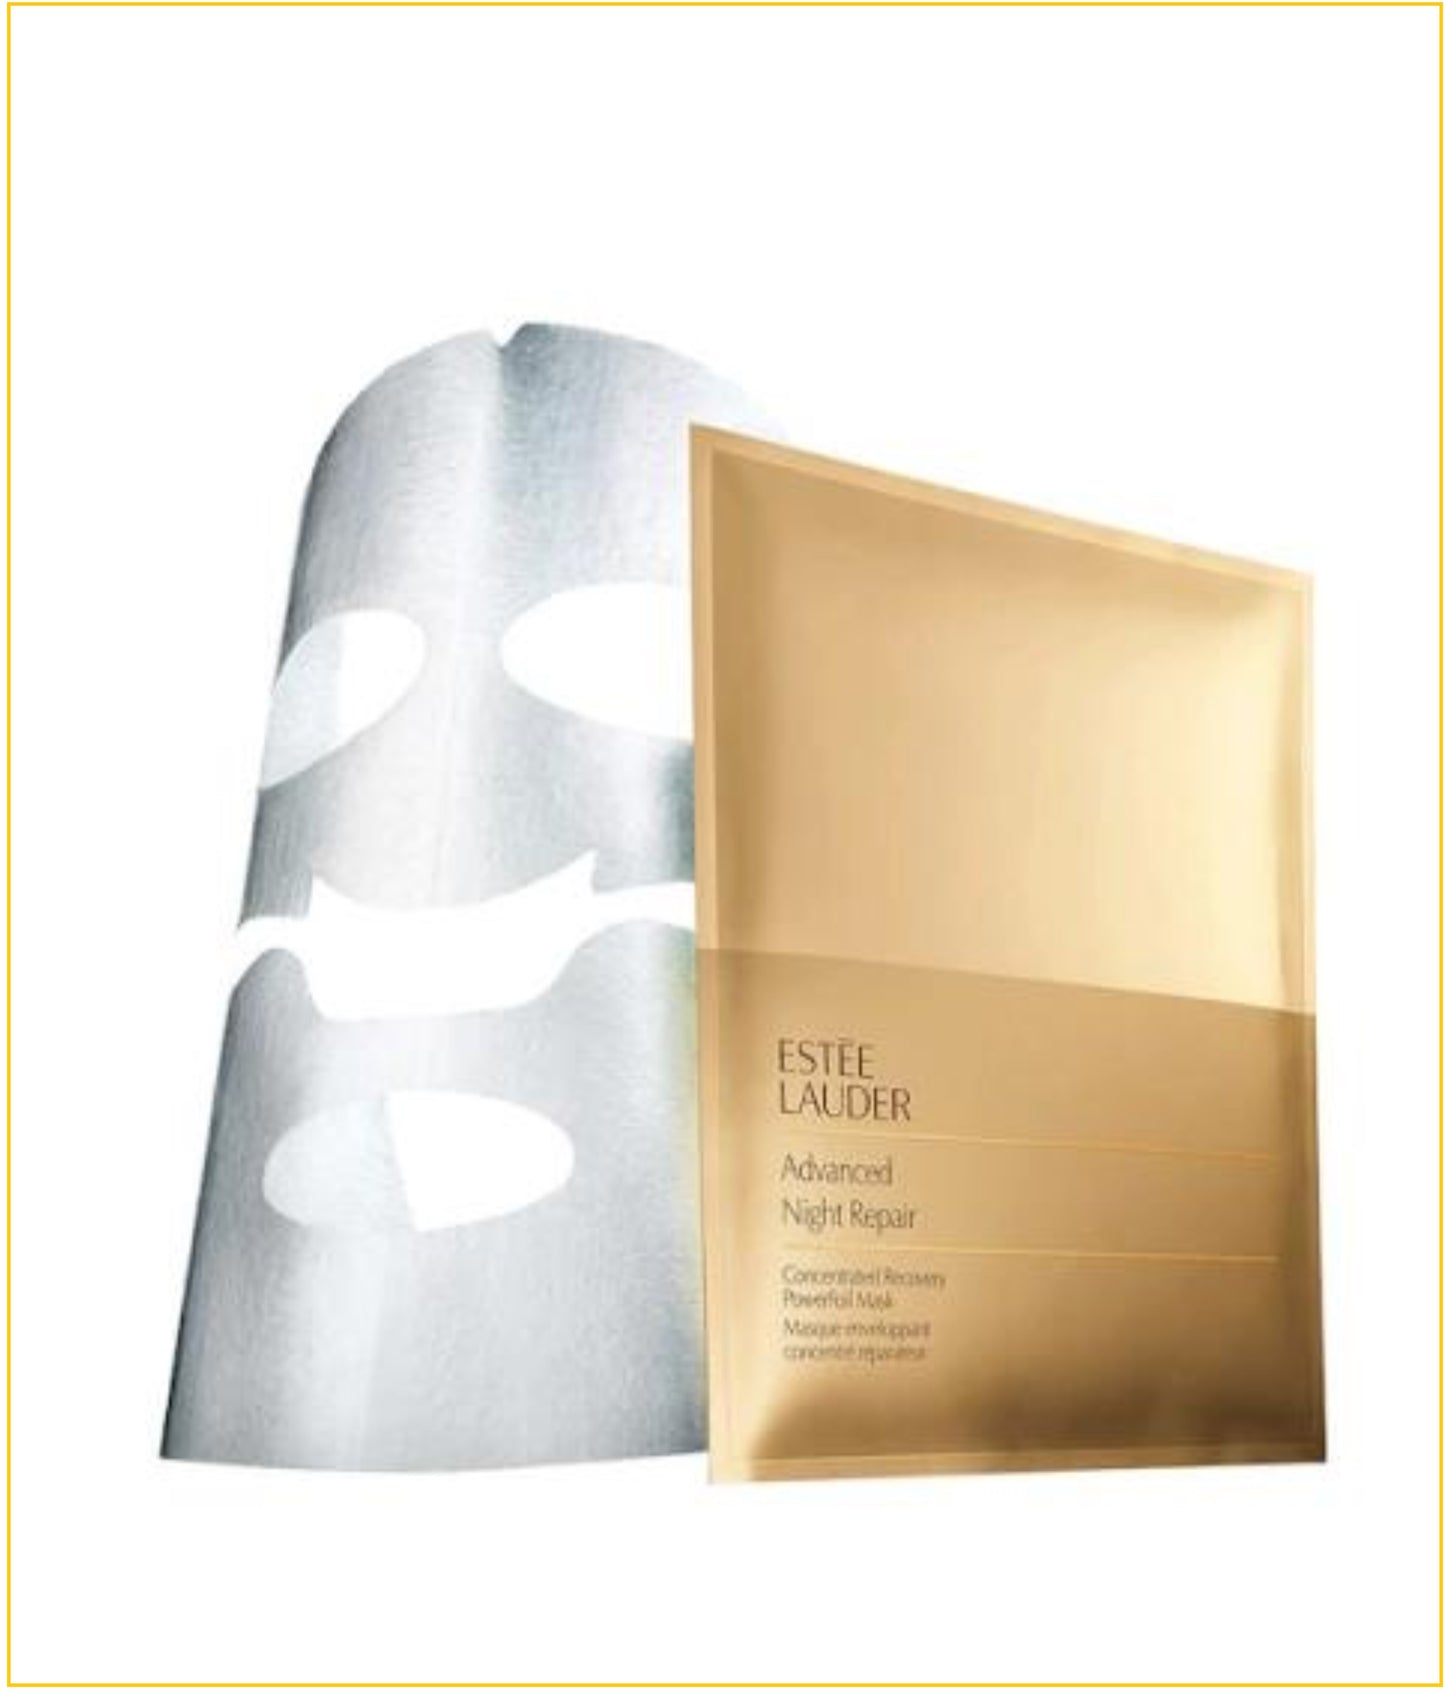 ESTEE LAUDER ADVANCED NIGHT REPAIR CONCENTRATED RECOVERY POWERFOIL MASK 8 SHEETS 再生基因雙層銀箔修護面膜